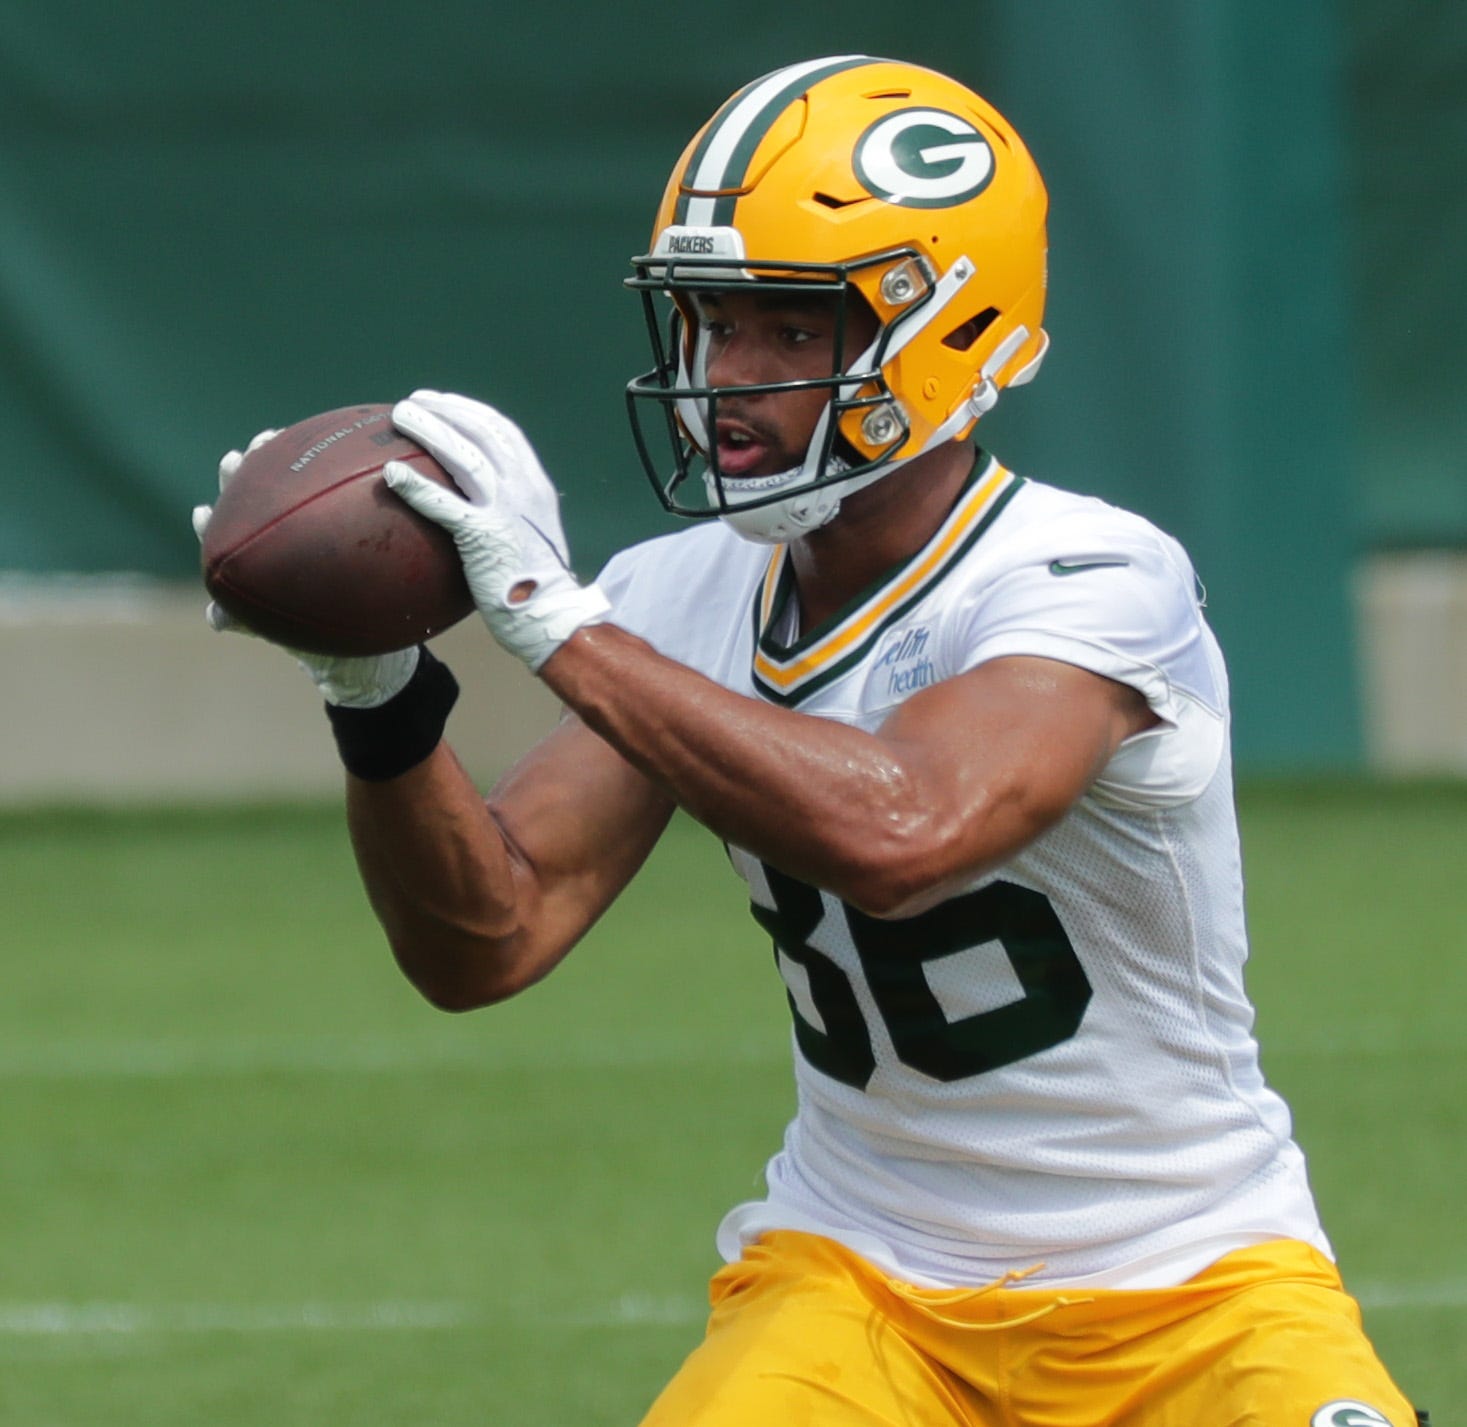 Green Bay Packers wide receiver Malik Taylor (86) is shown Saturday, Aug. 15, 2020, during the team's first practice at training camp in Green Bay, Wis.